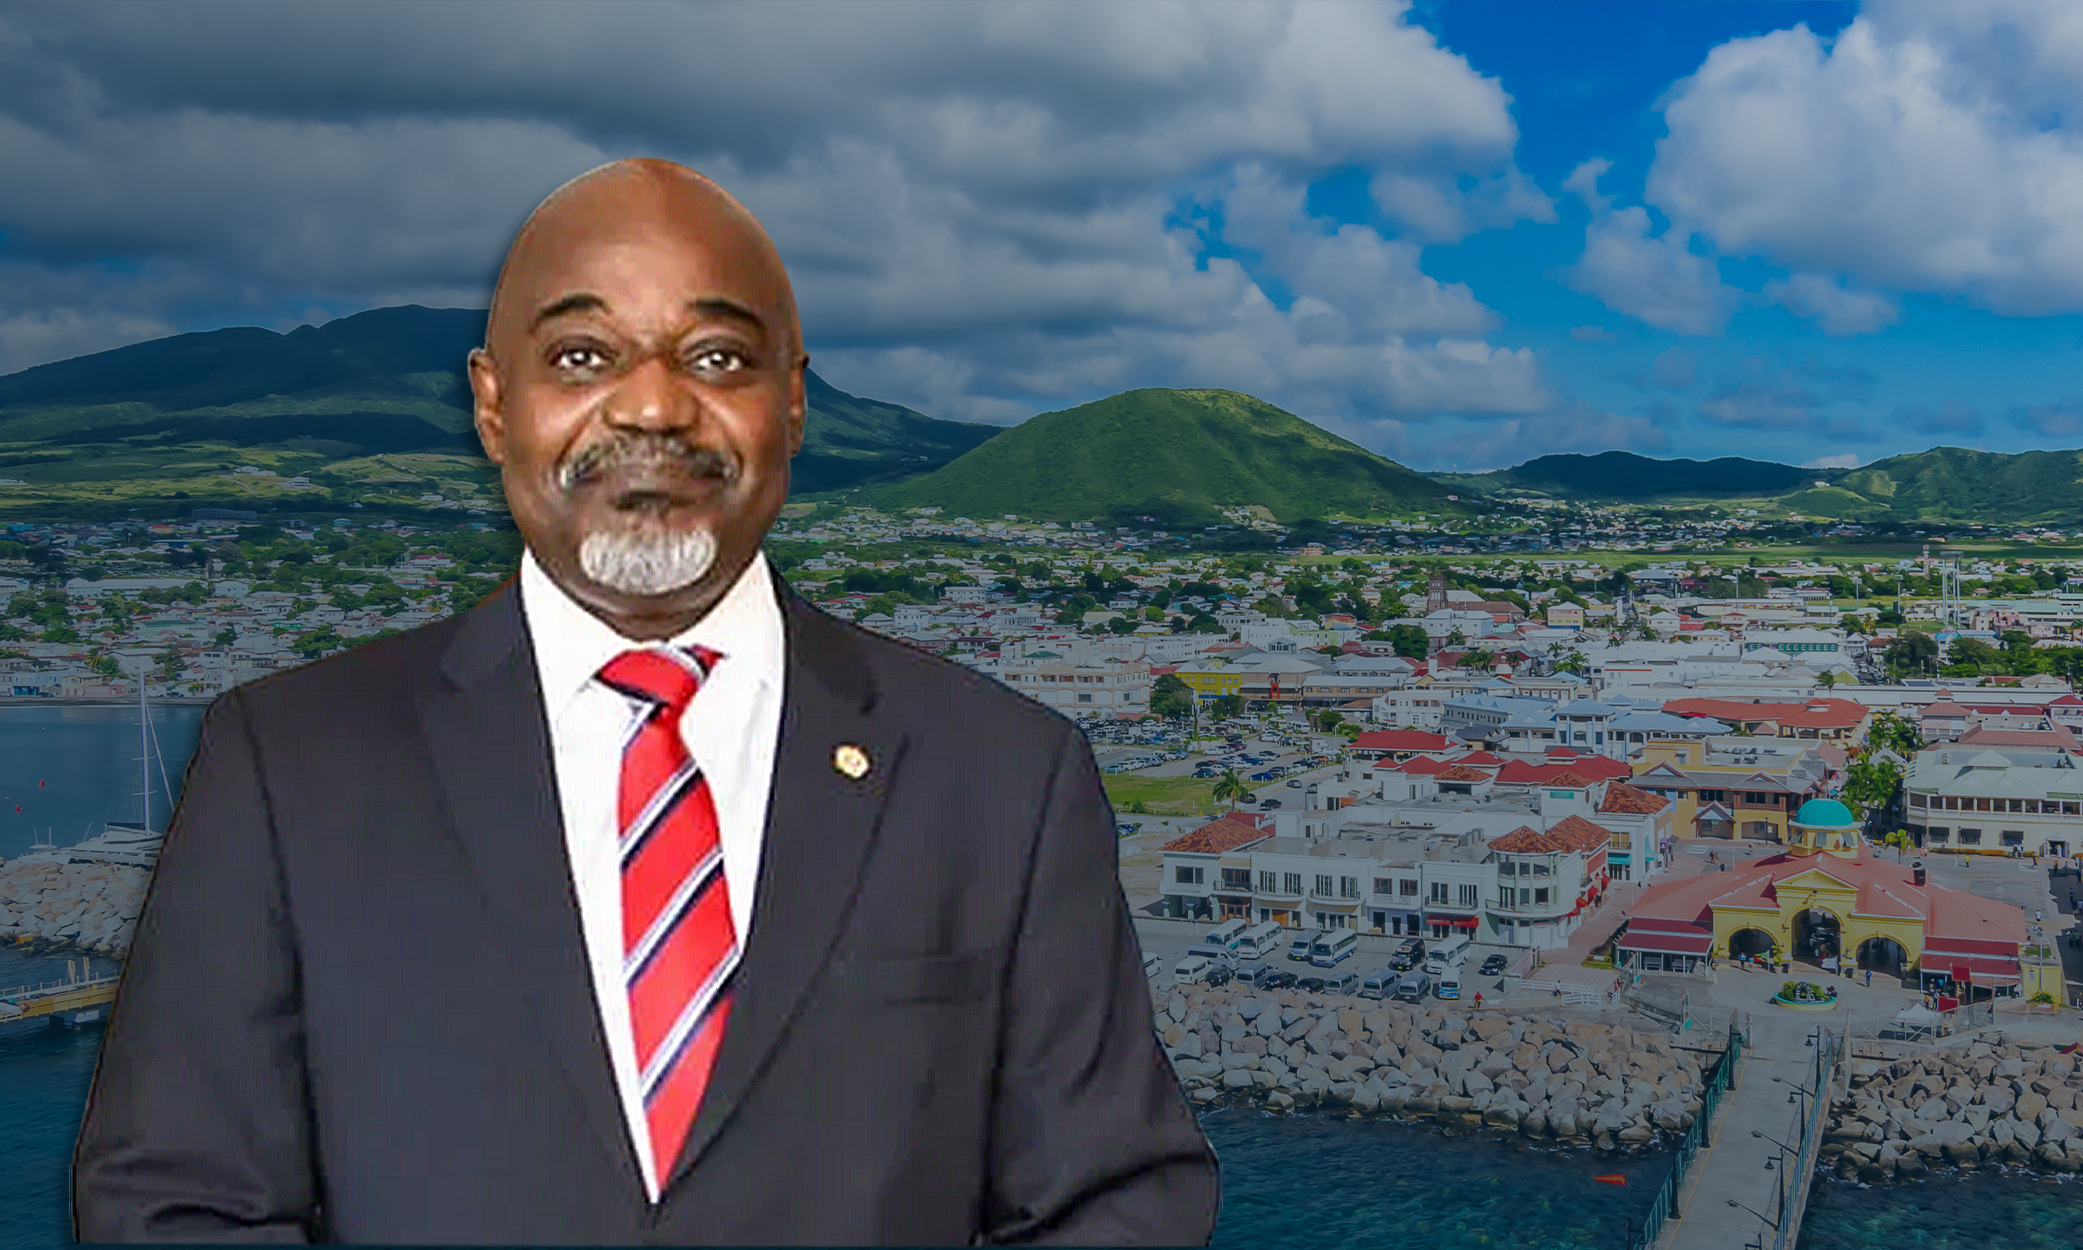 New St Kitts and Nevis CIU Head Announces Limited Time Offer